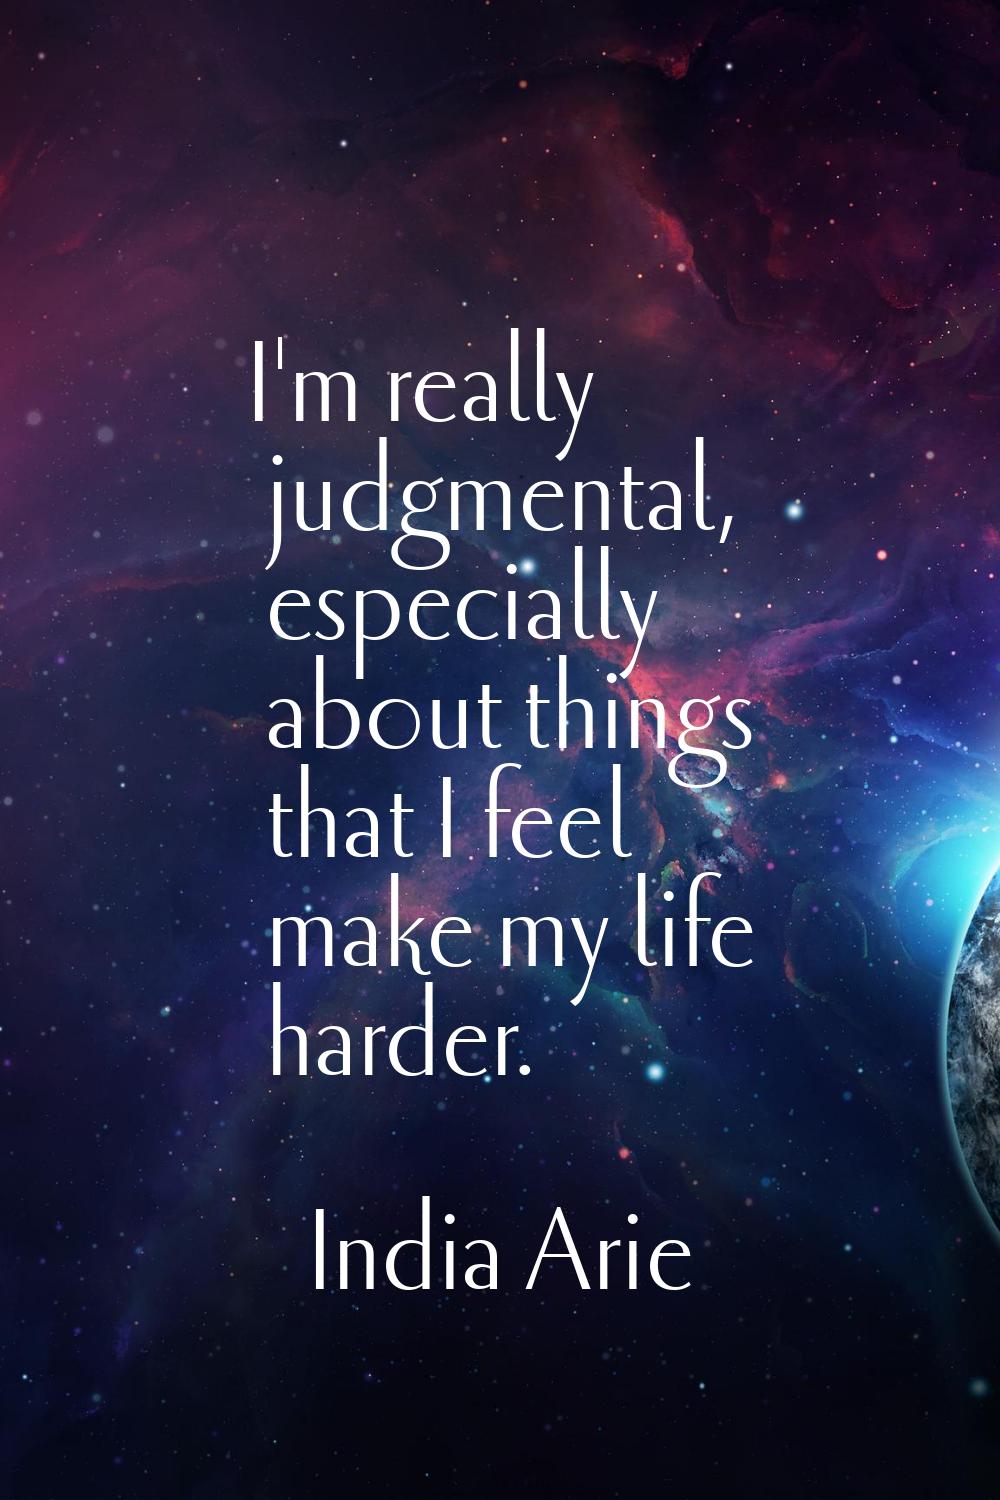 I'm really judgmental, especially about things that I feel make my life harder.